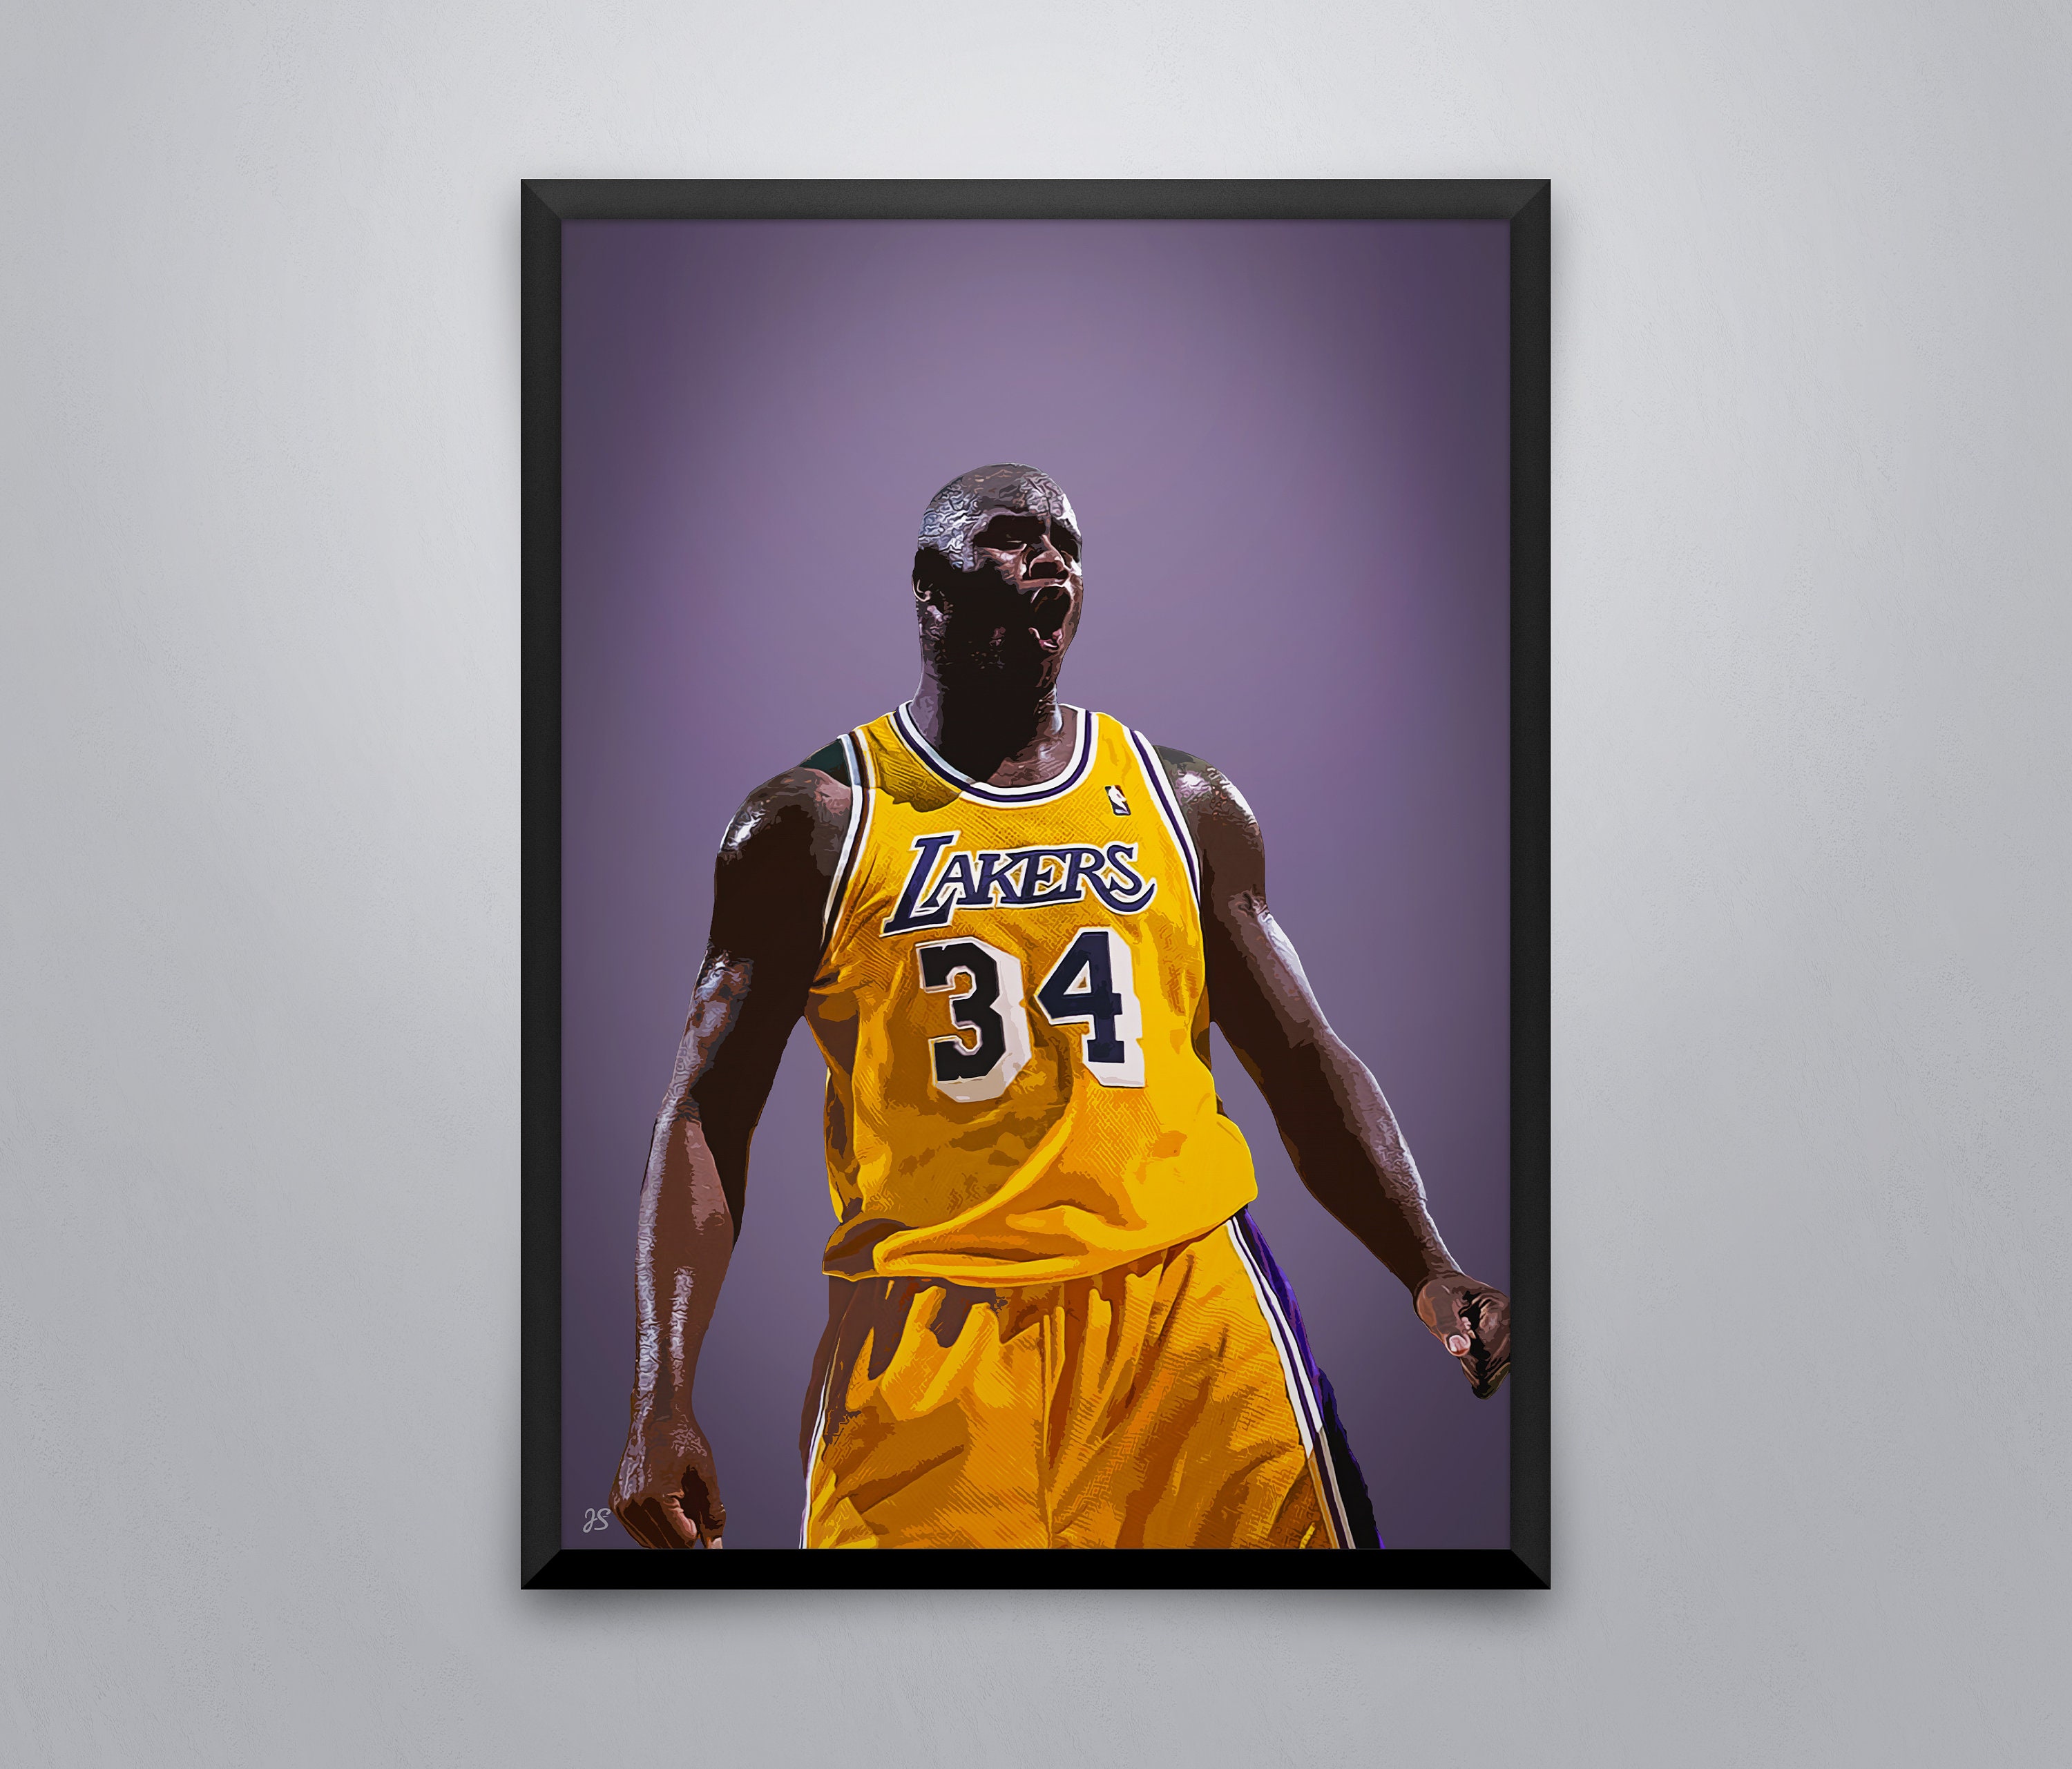 Shaquille O'Neal Rim Shaker Orlando Magic Rookie-Year Poster - Costa –  Sports Poster Warehouse